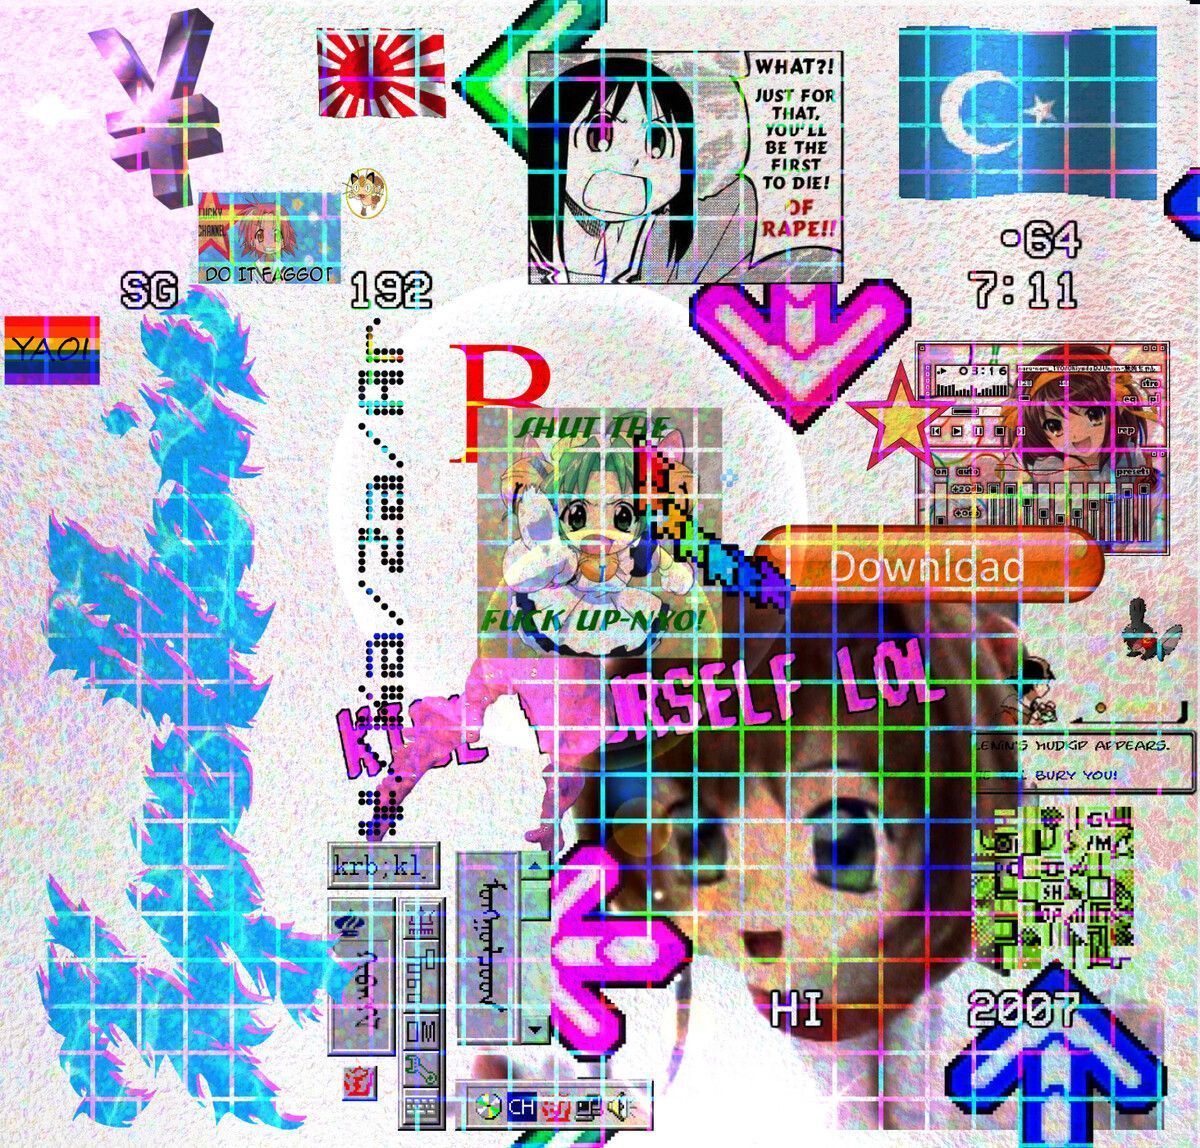 A collage of various internet culture elements, including Japanese text, anime, and a meme of a dog. - Webcore